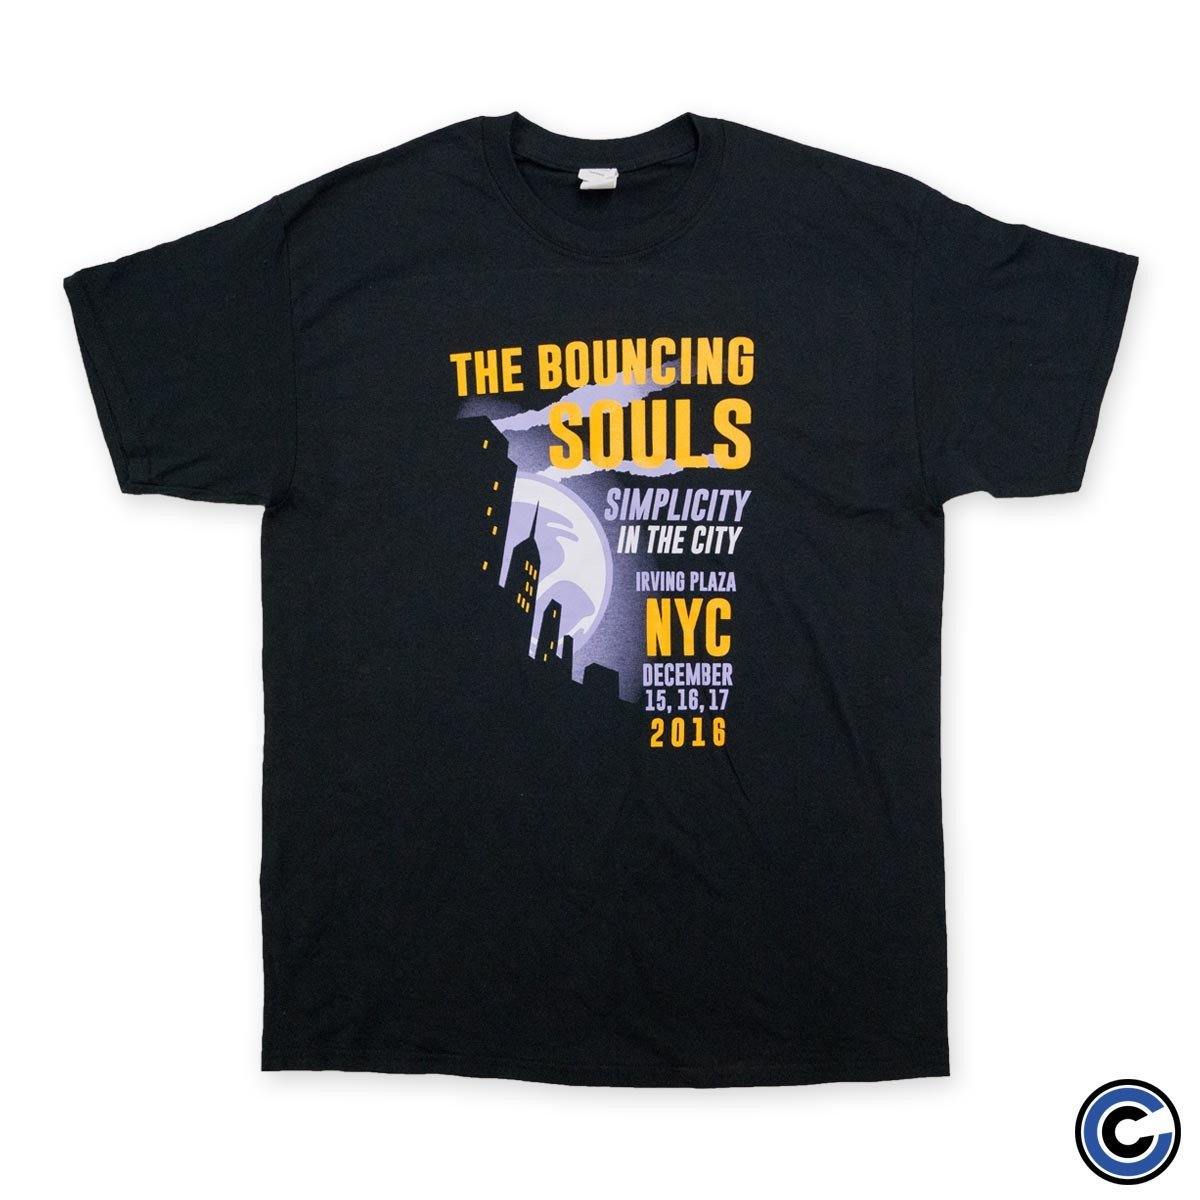 Buy – The Bouncing Souls "Simplicity in the City" Shirt – Band & Music Merch – Cold Cuts Merch